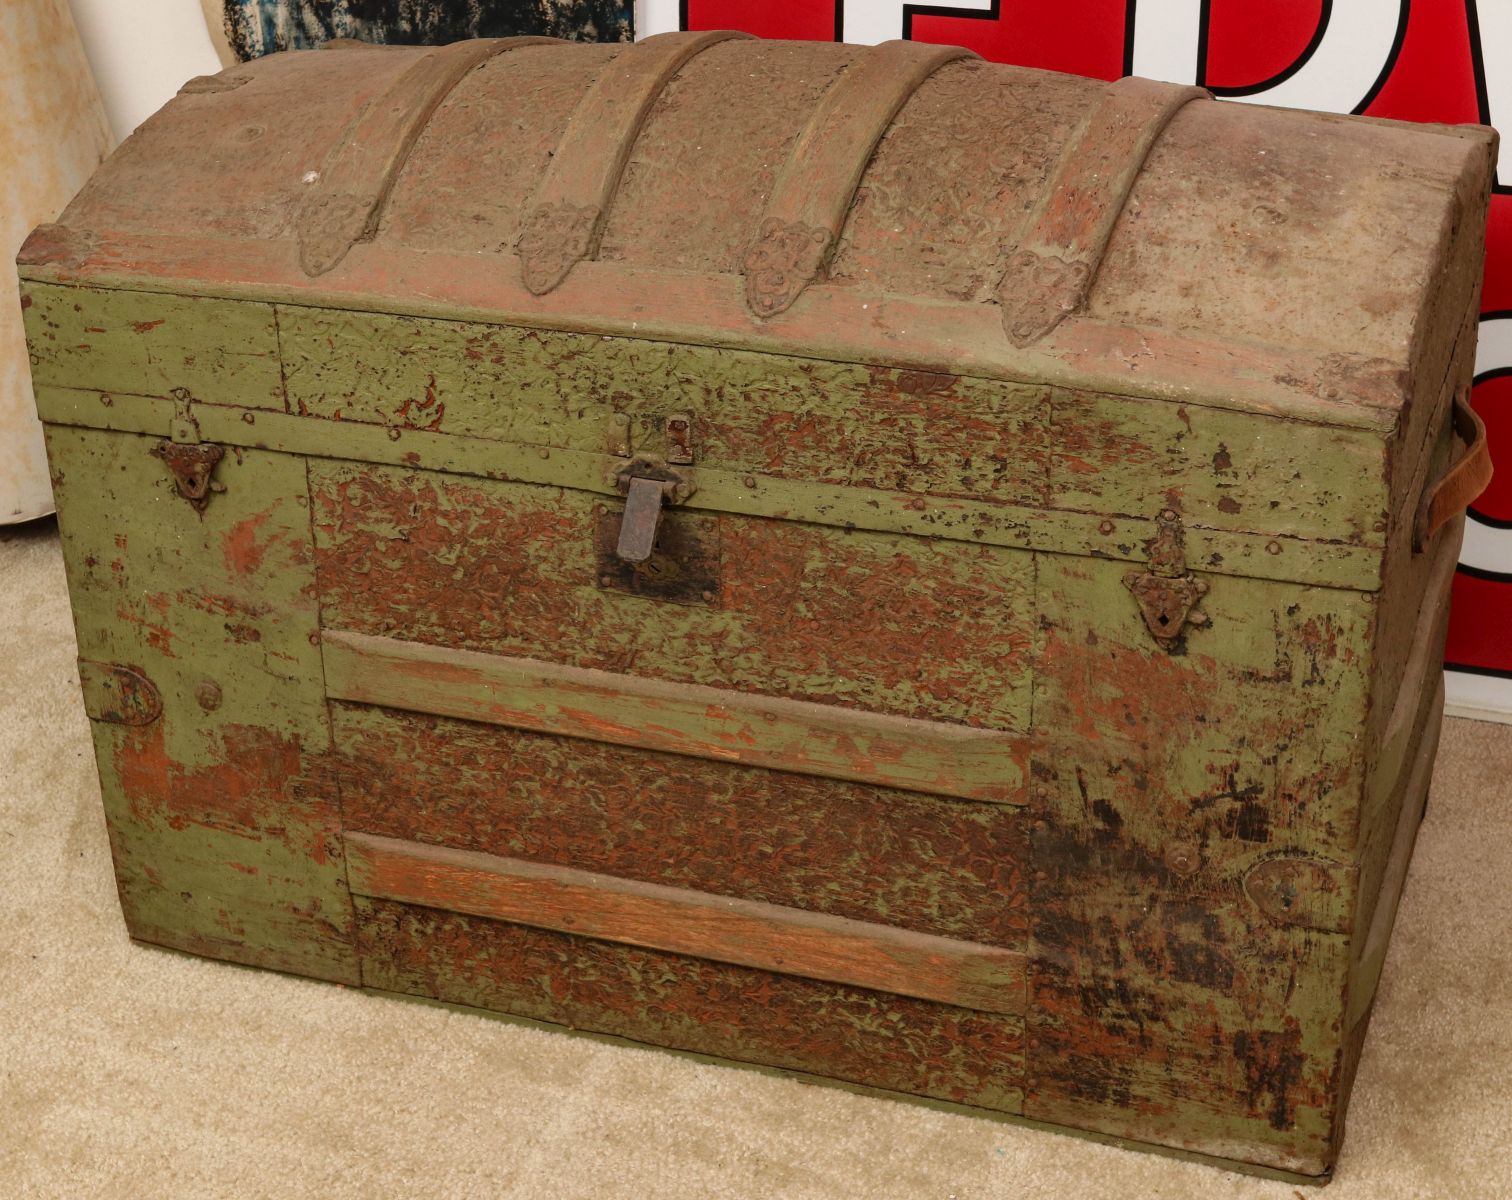 A VICTORIAN HUMP BACK TRUNK IN OLD GREEN PAINT